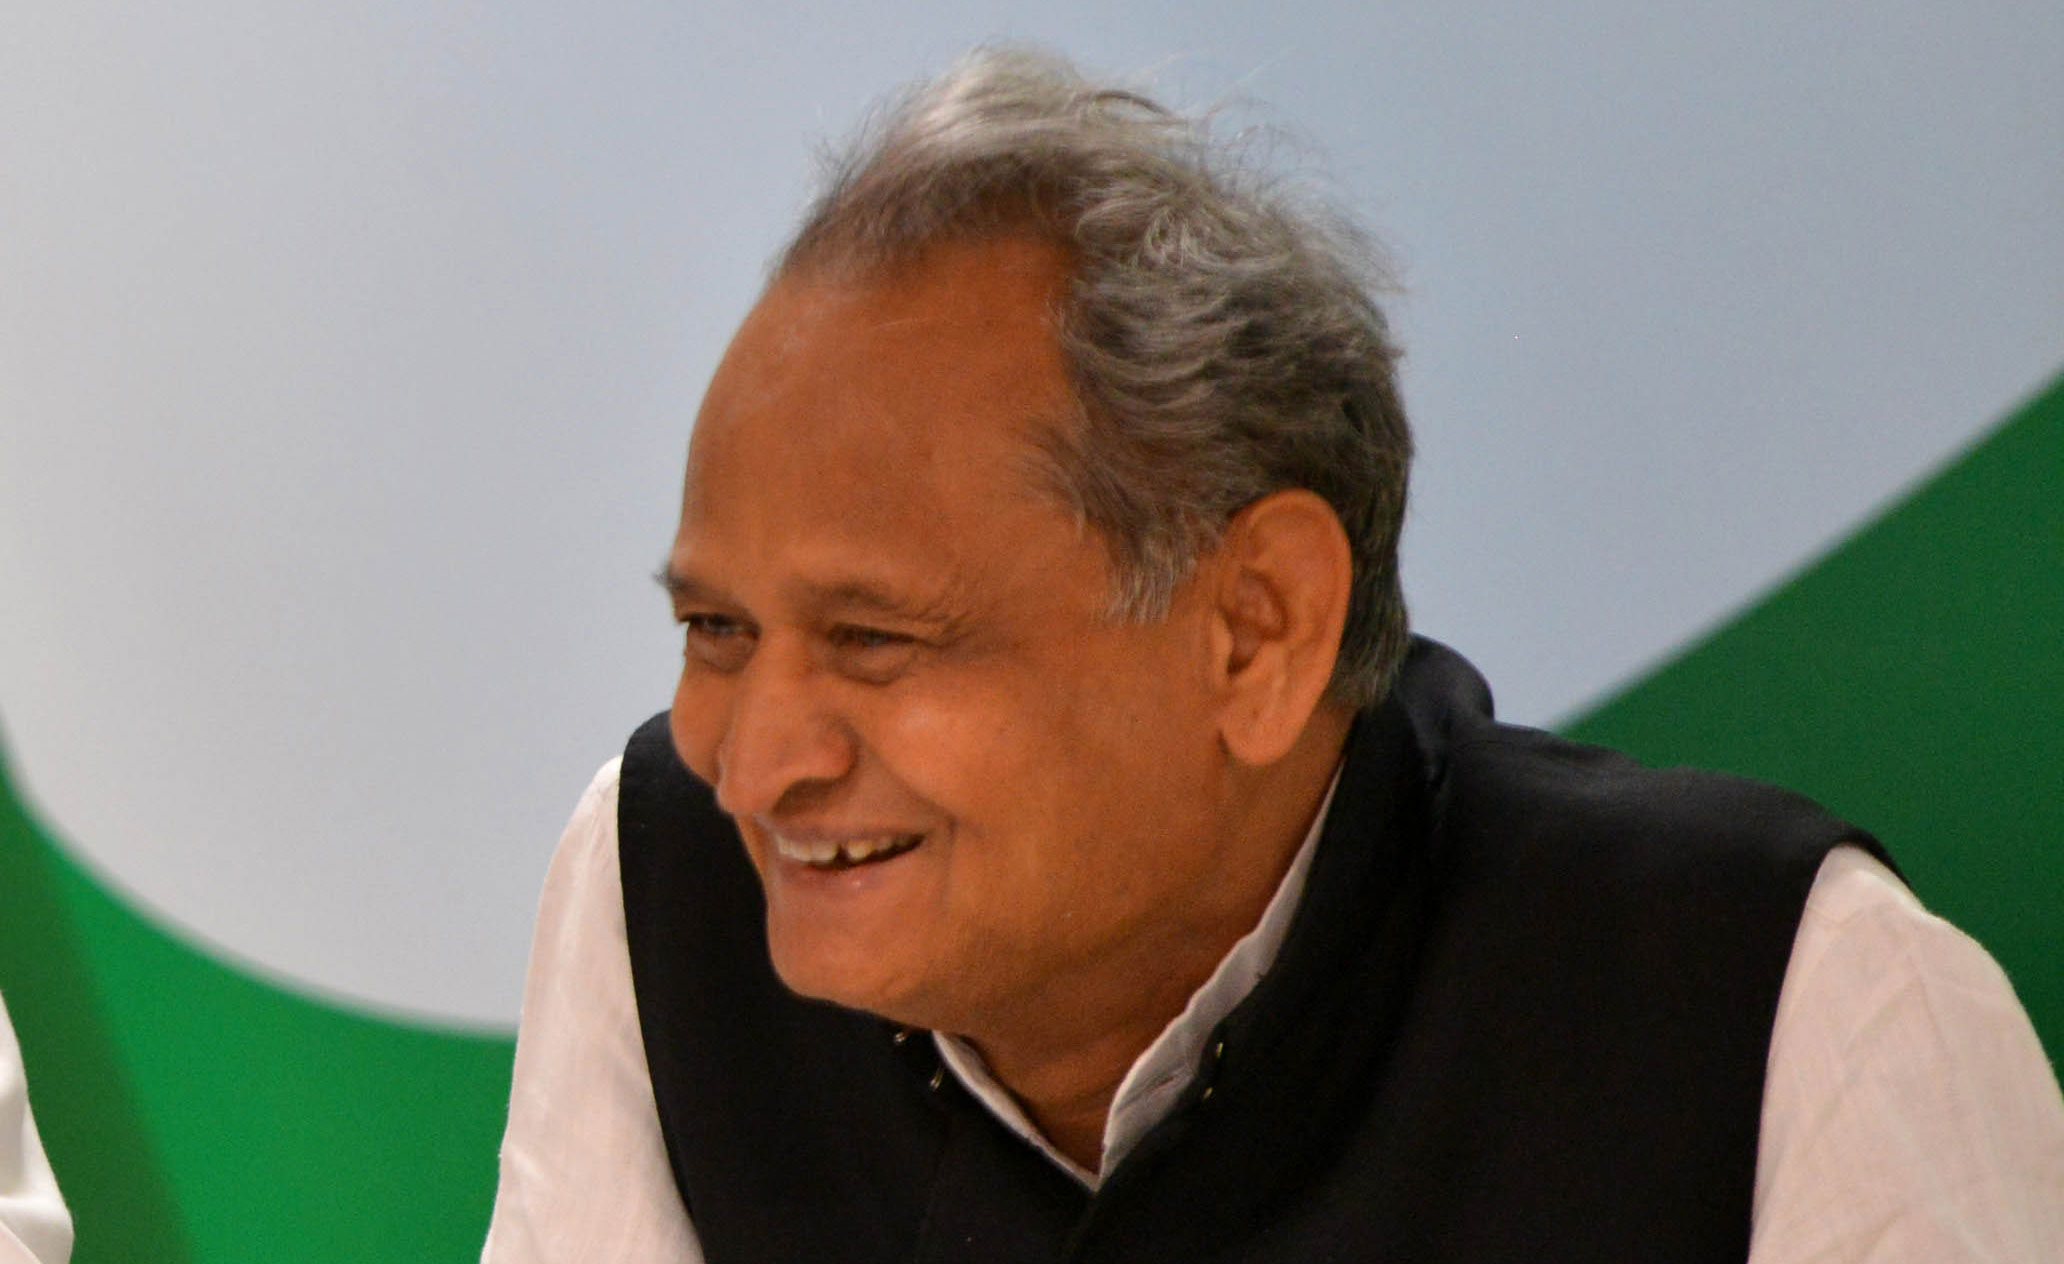 Congress general secretary in charge of organisation Ashok Gehlot has written to every state unit across the country to hold protest marches and demonstrations on November 9, the day currency notes worth Rs 500 and Rs 1,000 began to be be demonetised in 2016.